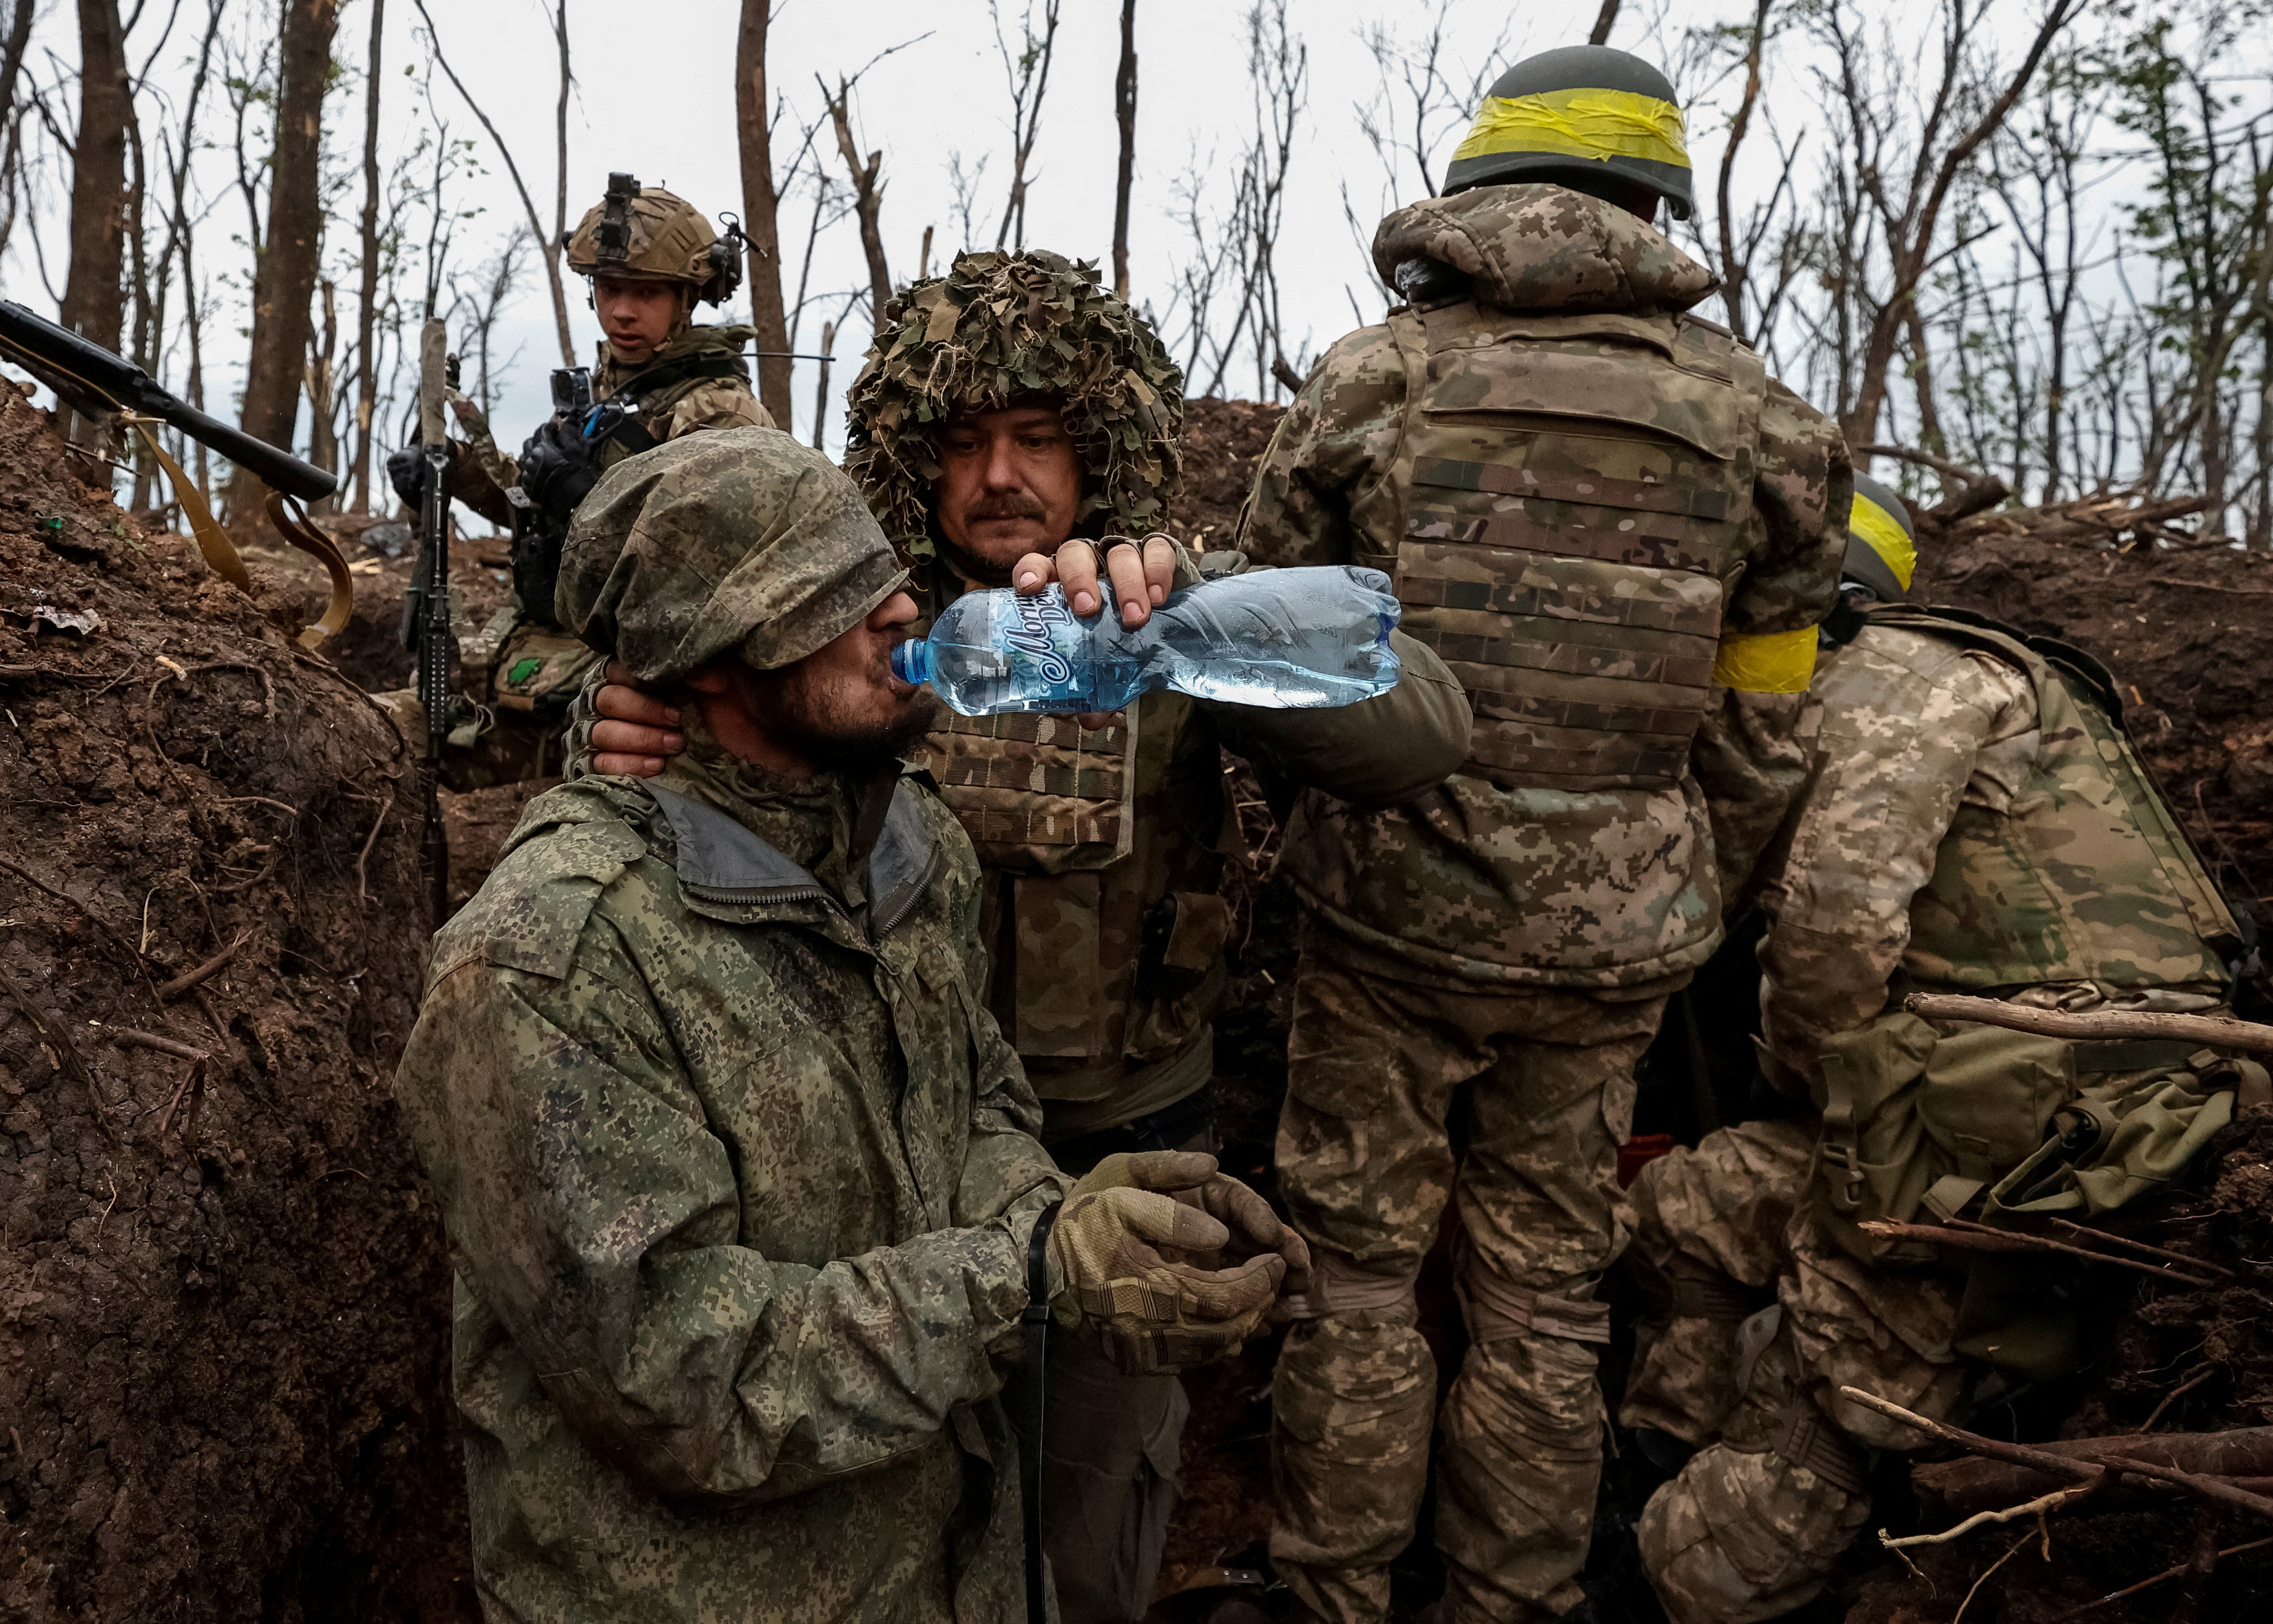 A Ukrainian soldier gives water to captured Russian soldiers near the front-line city of Bakhmut.